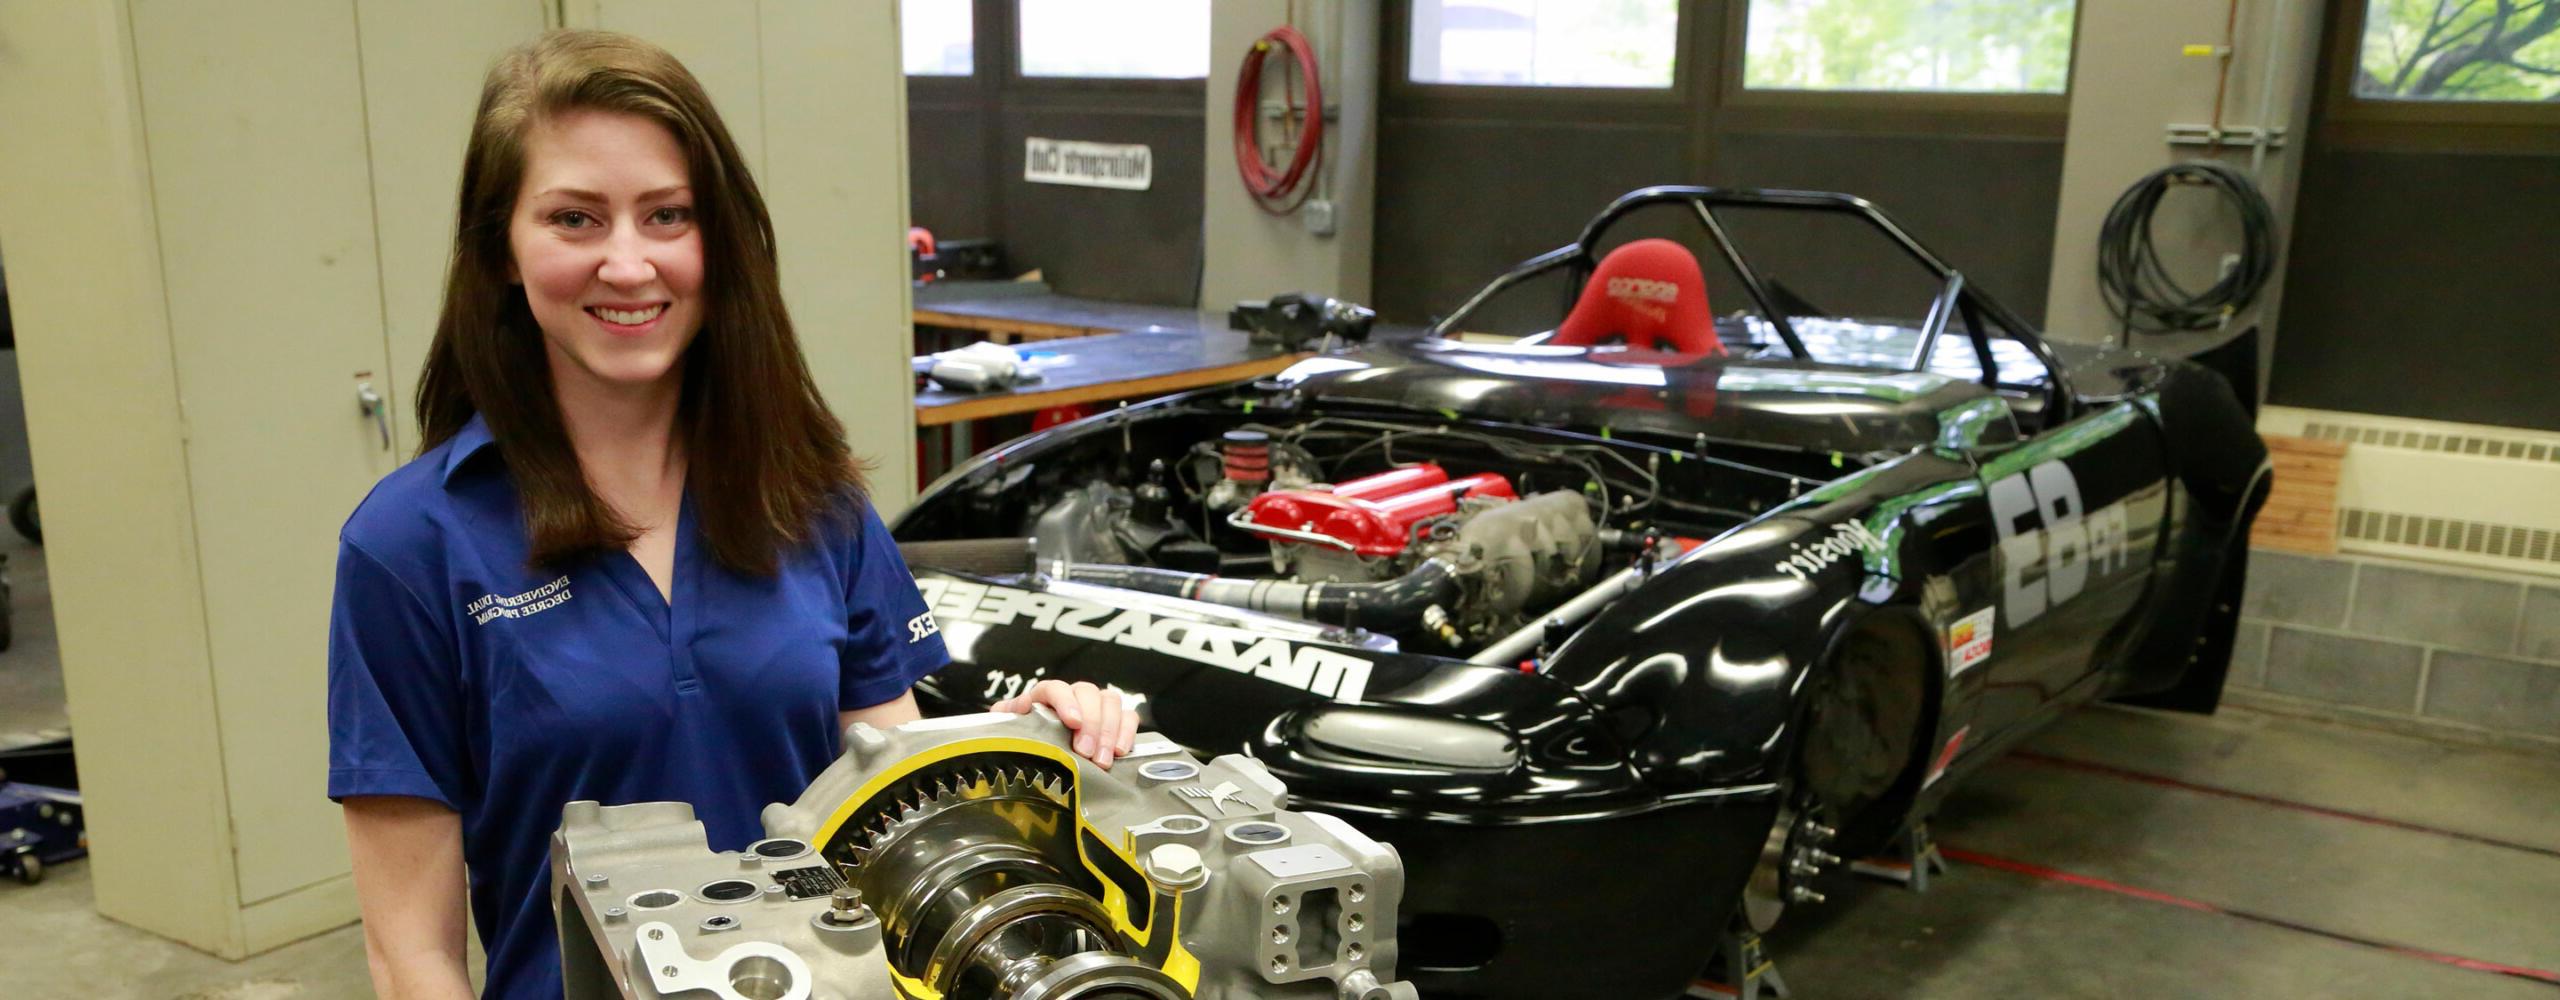 female in blue shirt and race car with hood off exposing engine